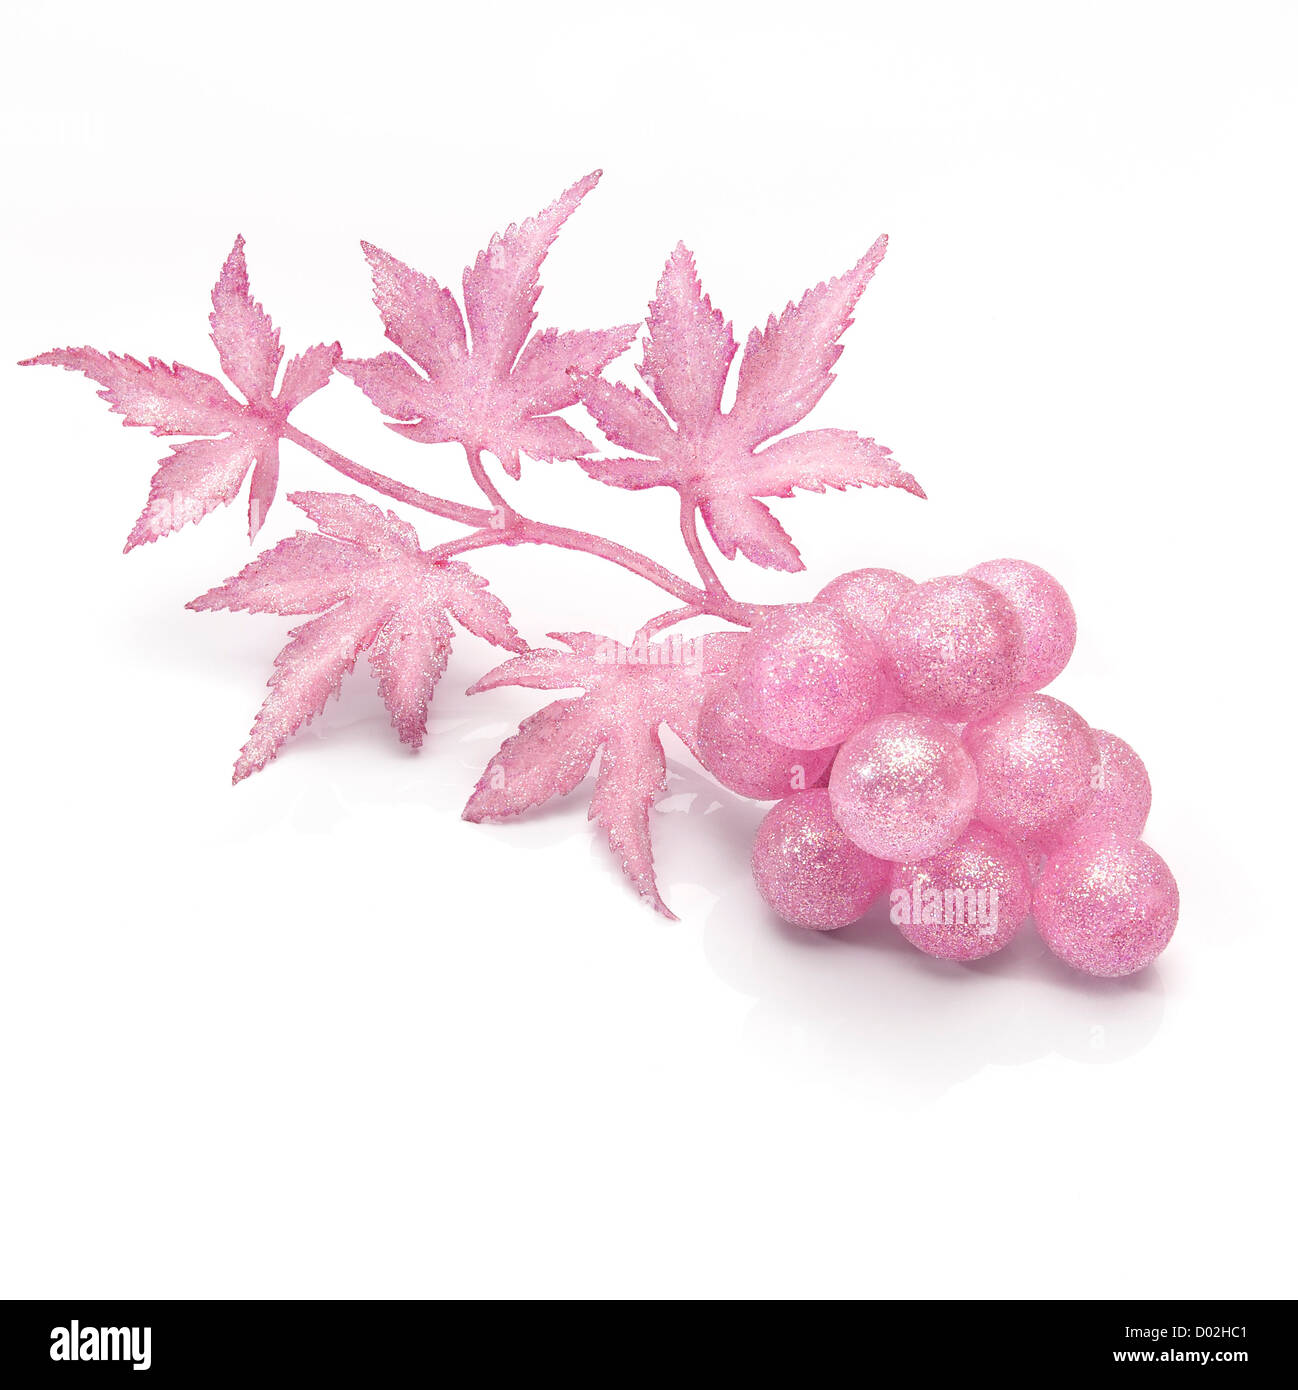 Christmas motif.Grapes fancy decoration with glitter Stock Photo